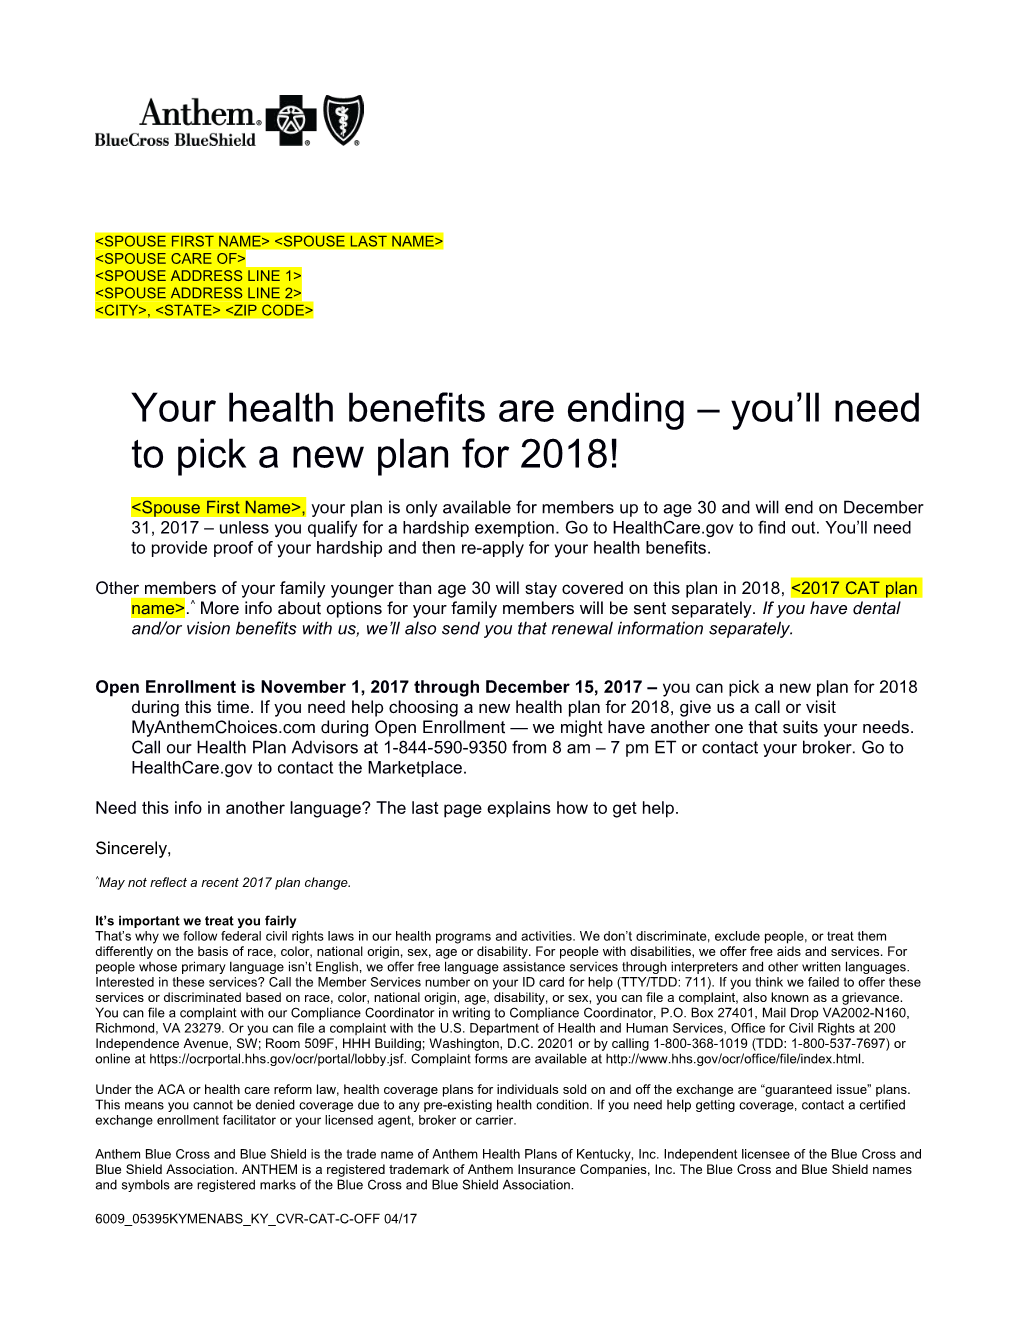 Your Health Benefits Are Ending You Ll Need Topick a Newplanfor 2018!